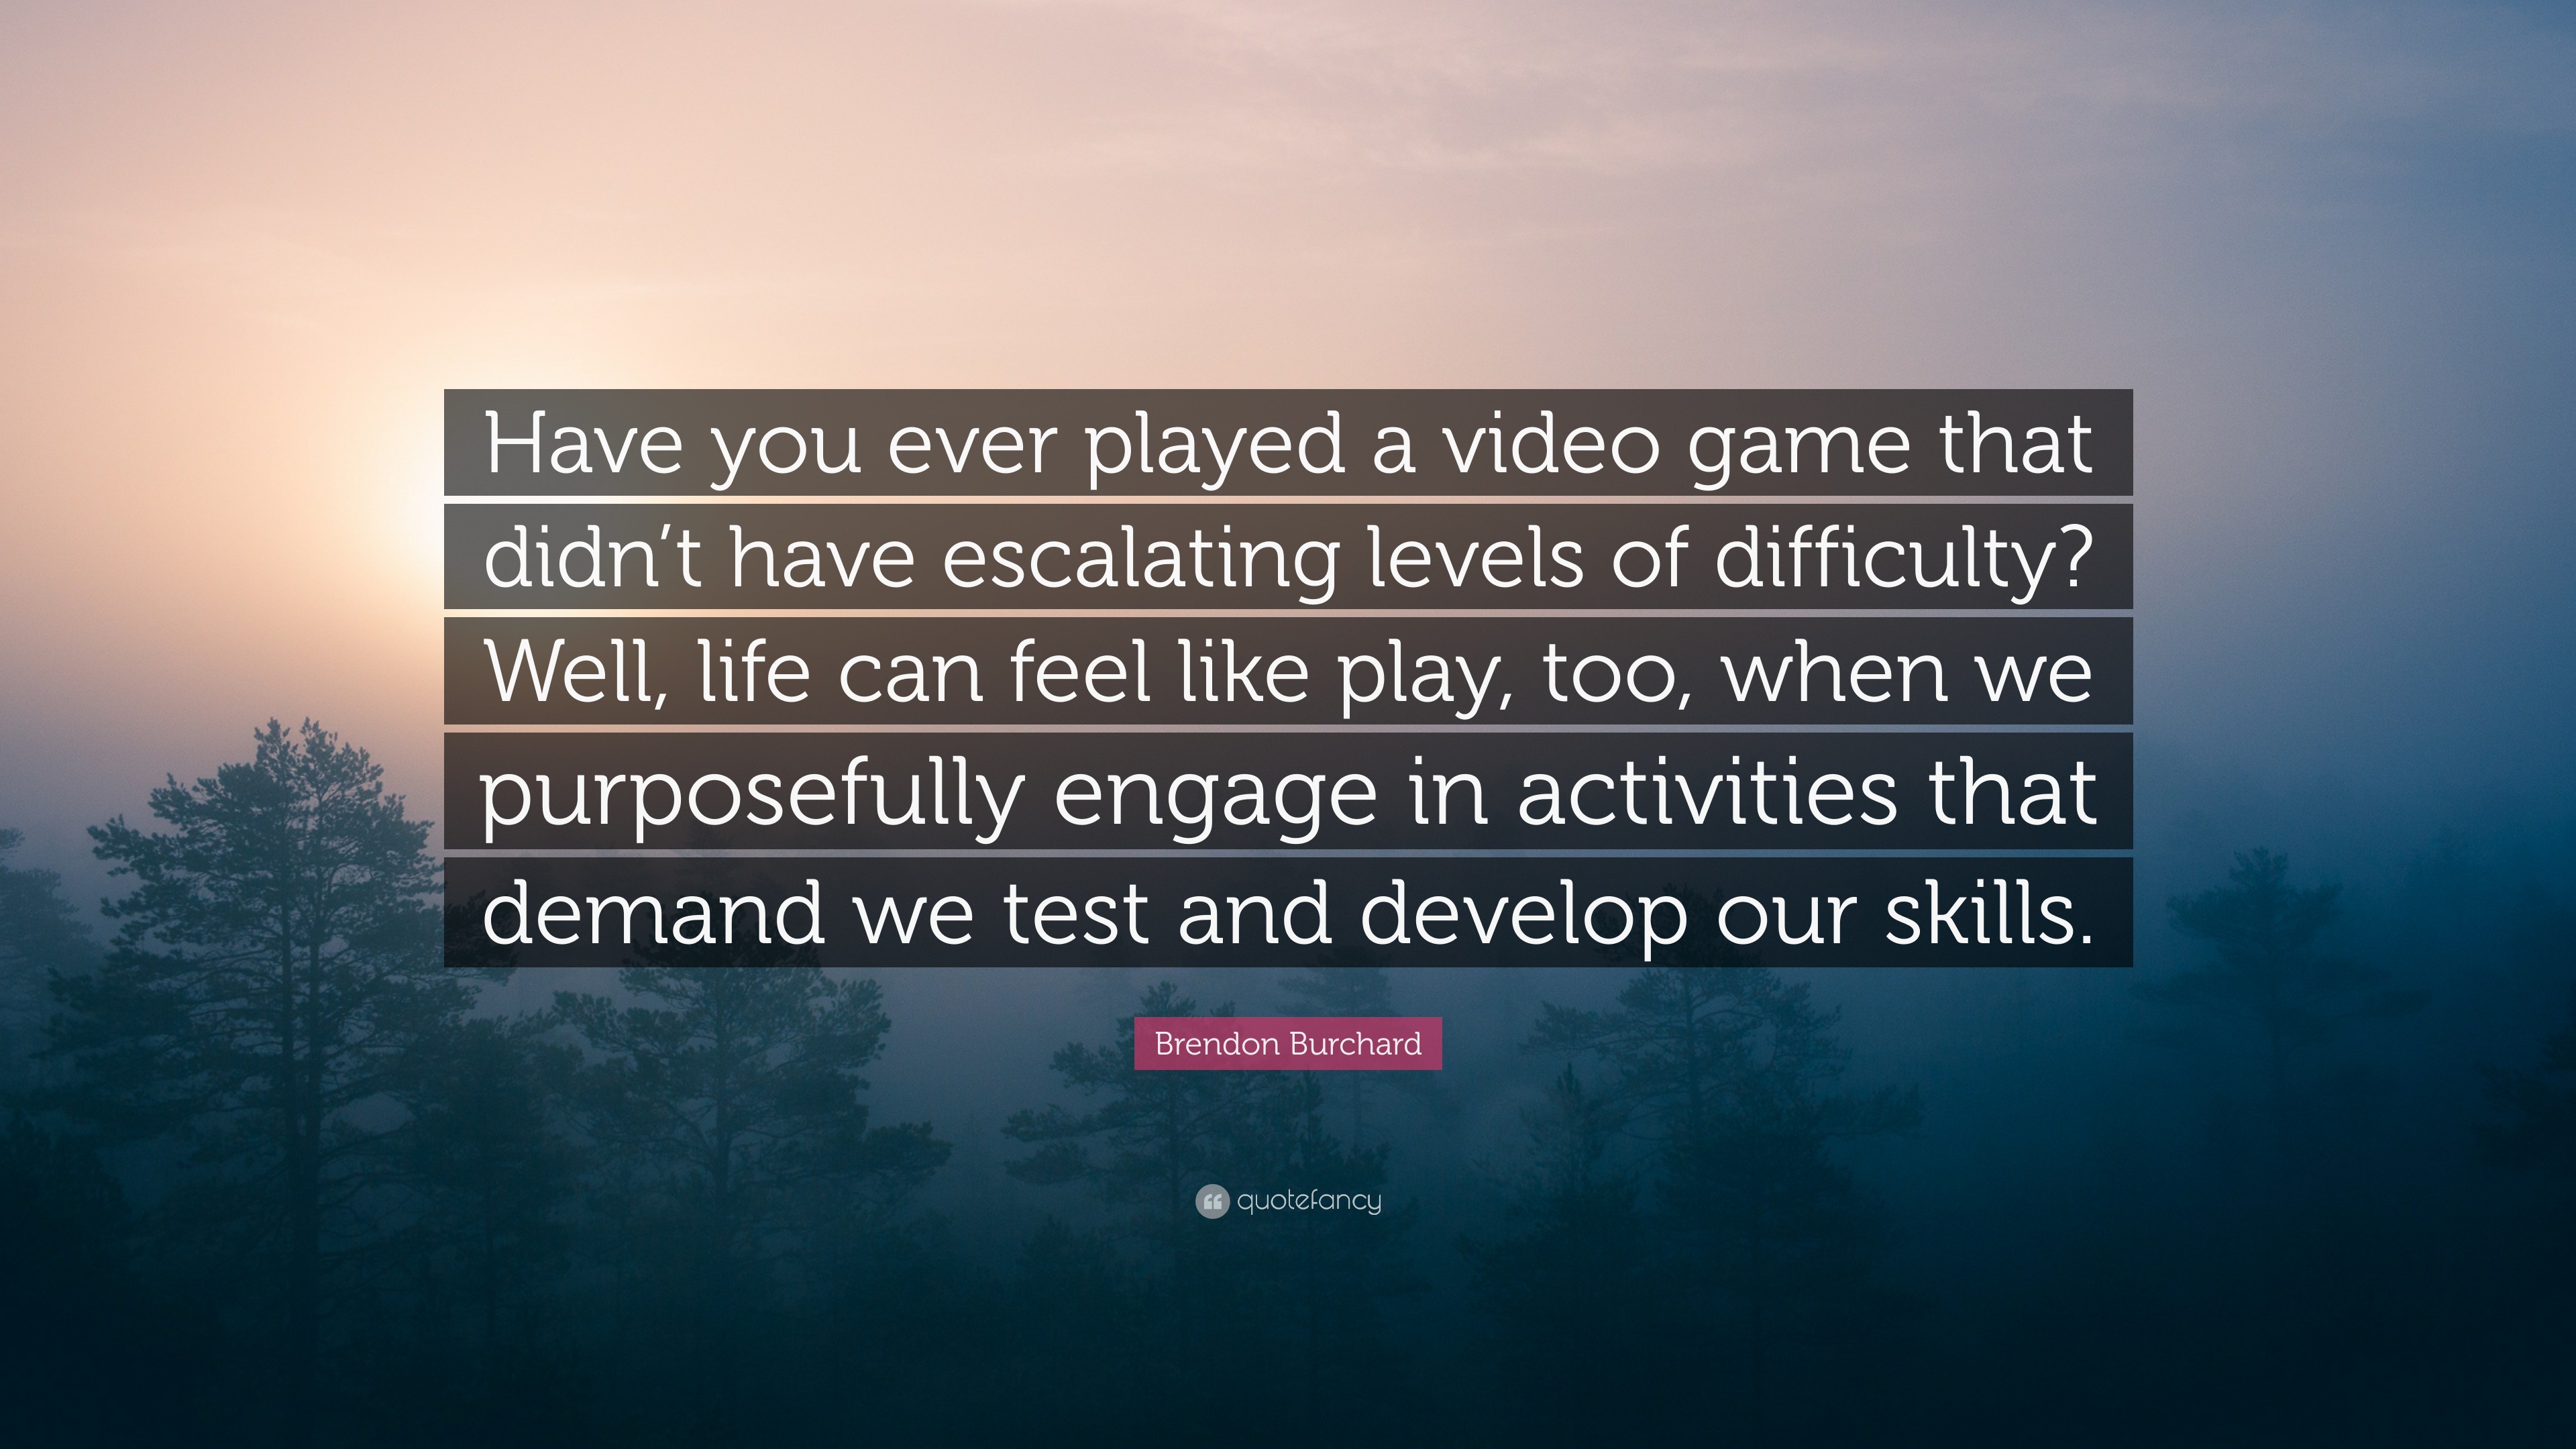 Brendon Burchard Quote “Have you ever played a video game that didnt have escalating levels of difficulty? Well, life can feel like play, too, ...”